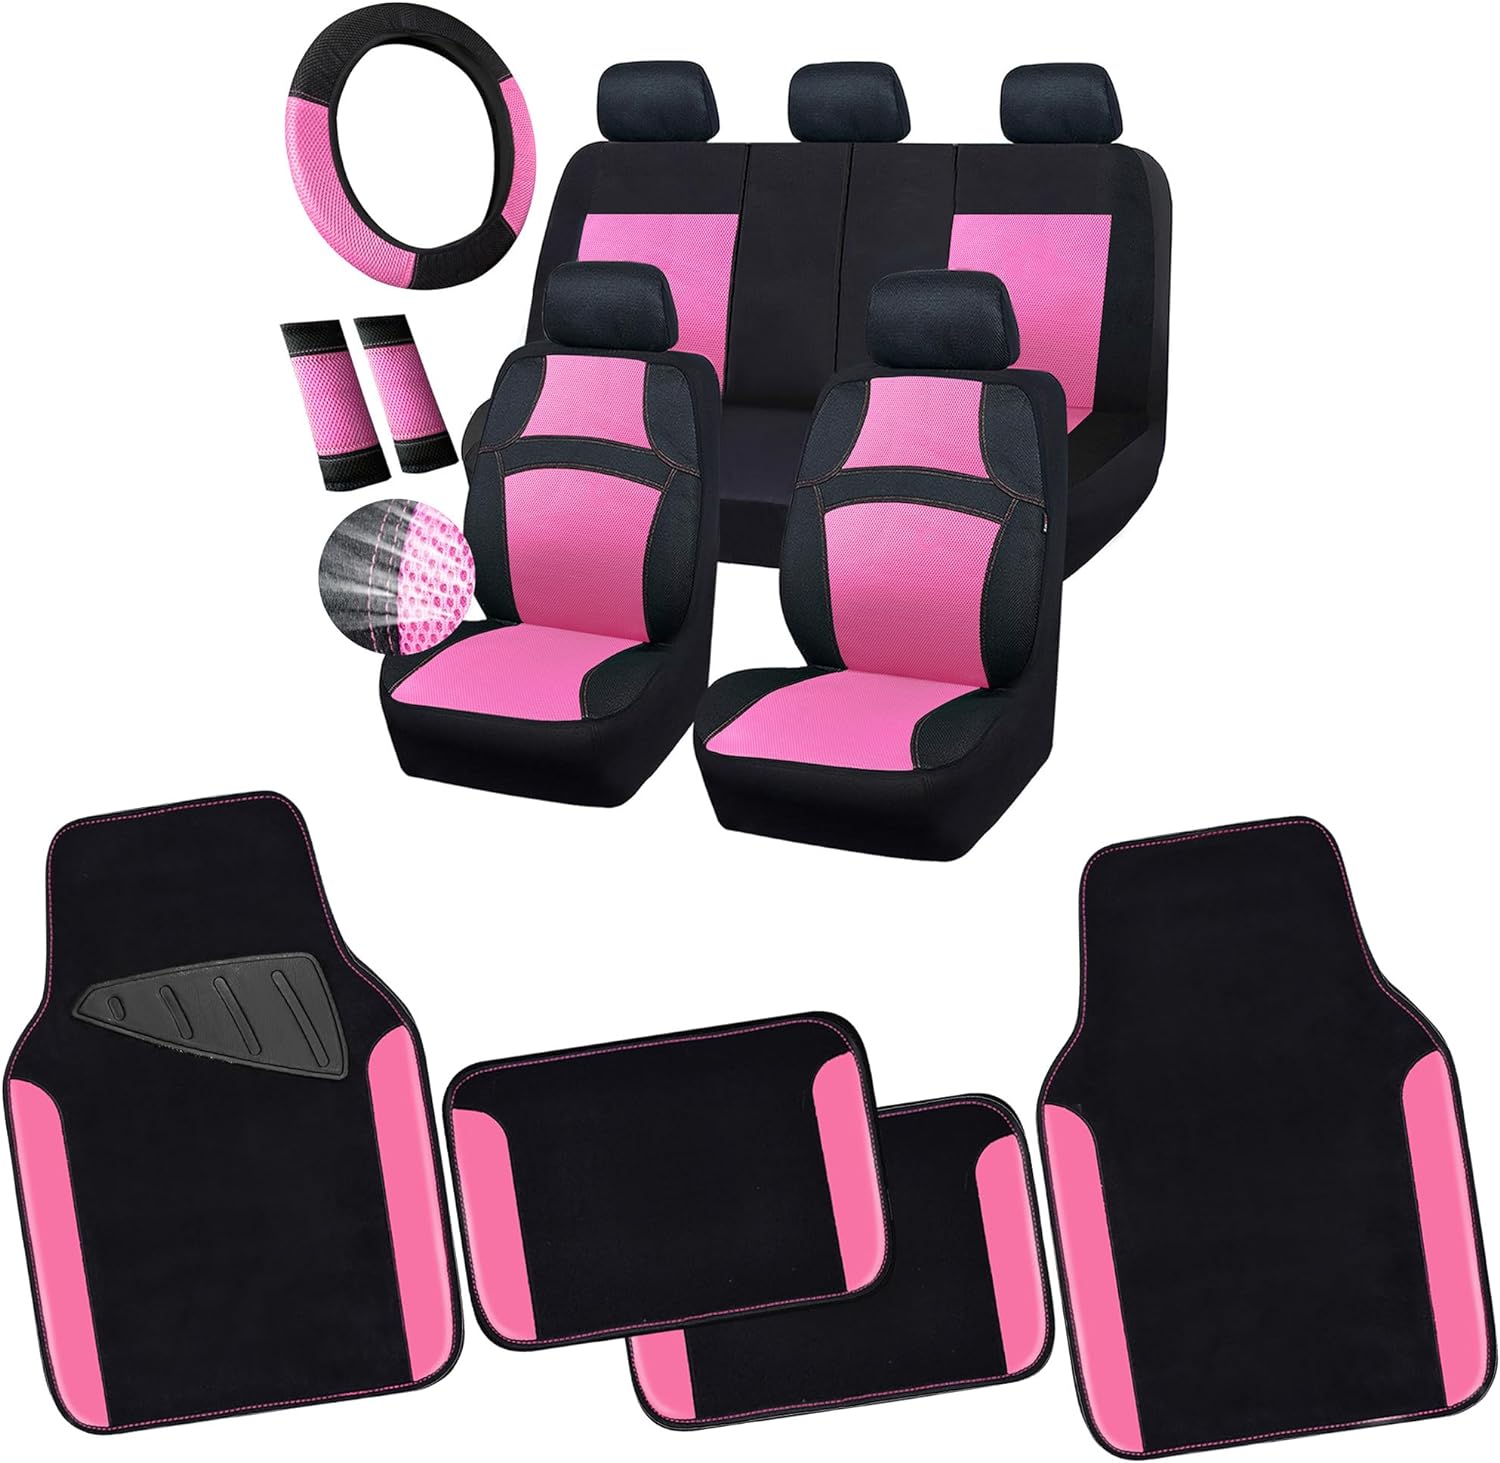 CAR PASS Universal 13PCS 3D Air Mesh-100% Breathable Seat Covers Full Sets&Car Mats#Steering Wheel&Belt Cover #Airbag and Rear Split Bench Compatible#for 90% Automotive SUV Truck Pink